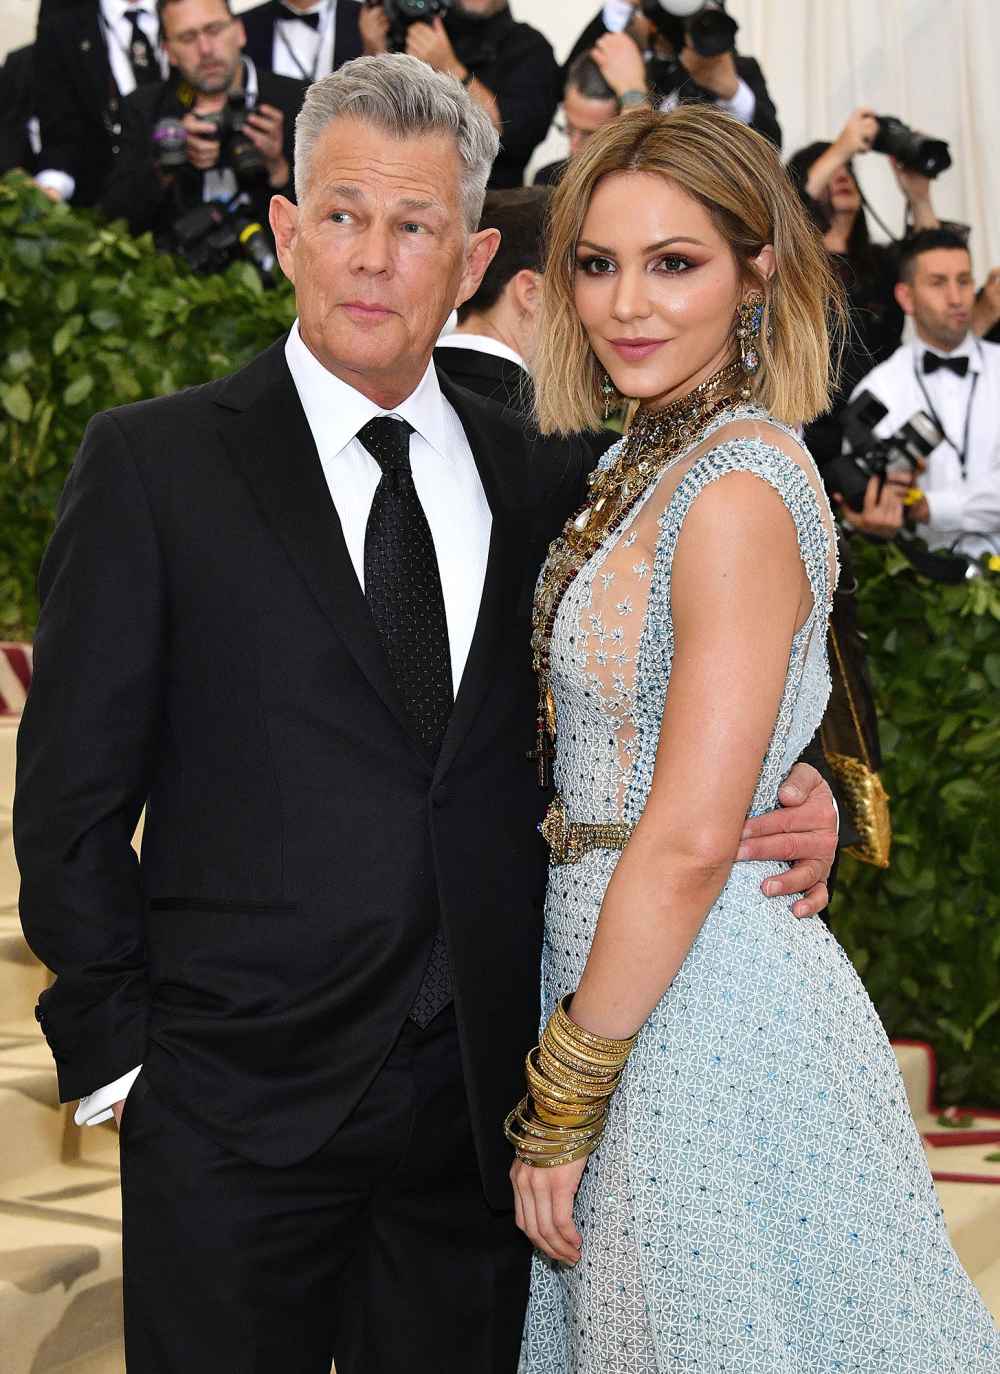 David Foster and Katharine McPhee Heavenly Bodies Wedding Pics Released